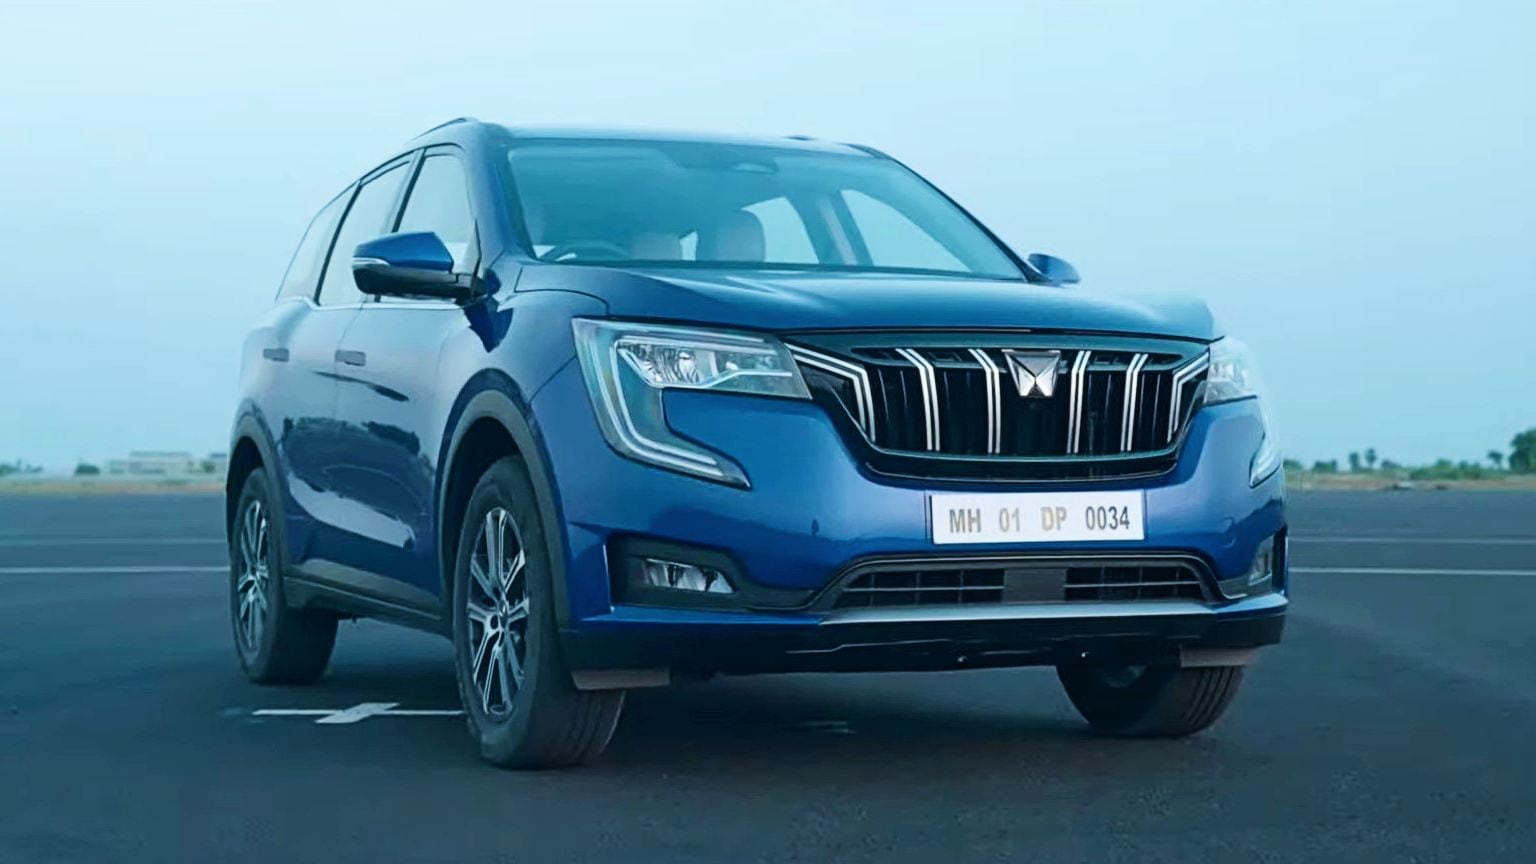 Mahindra XUV700 makes its world premiere, packs the segment's first advanced driver assistance systems - Technology News, Firstpost